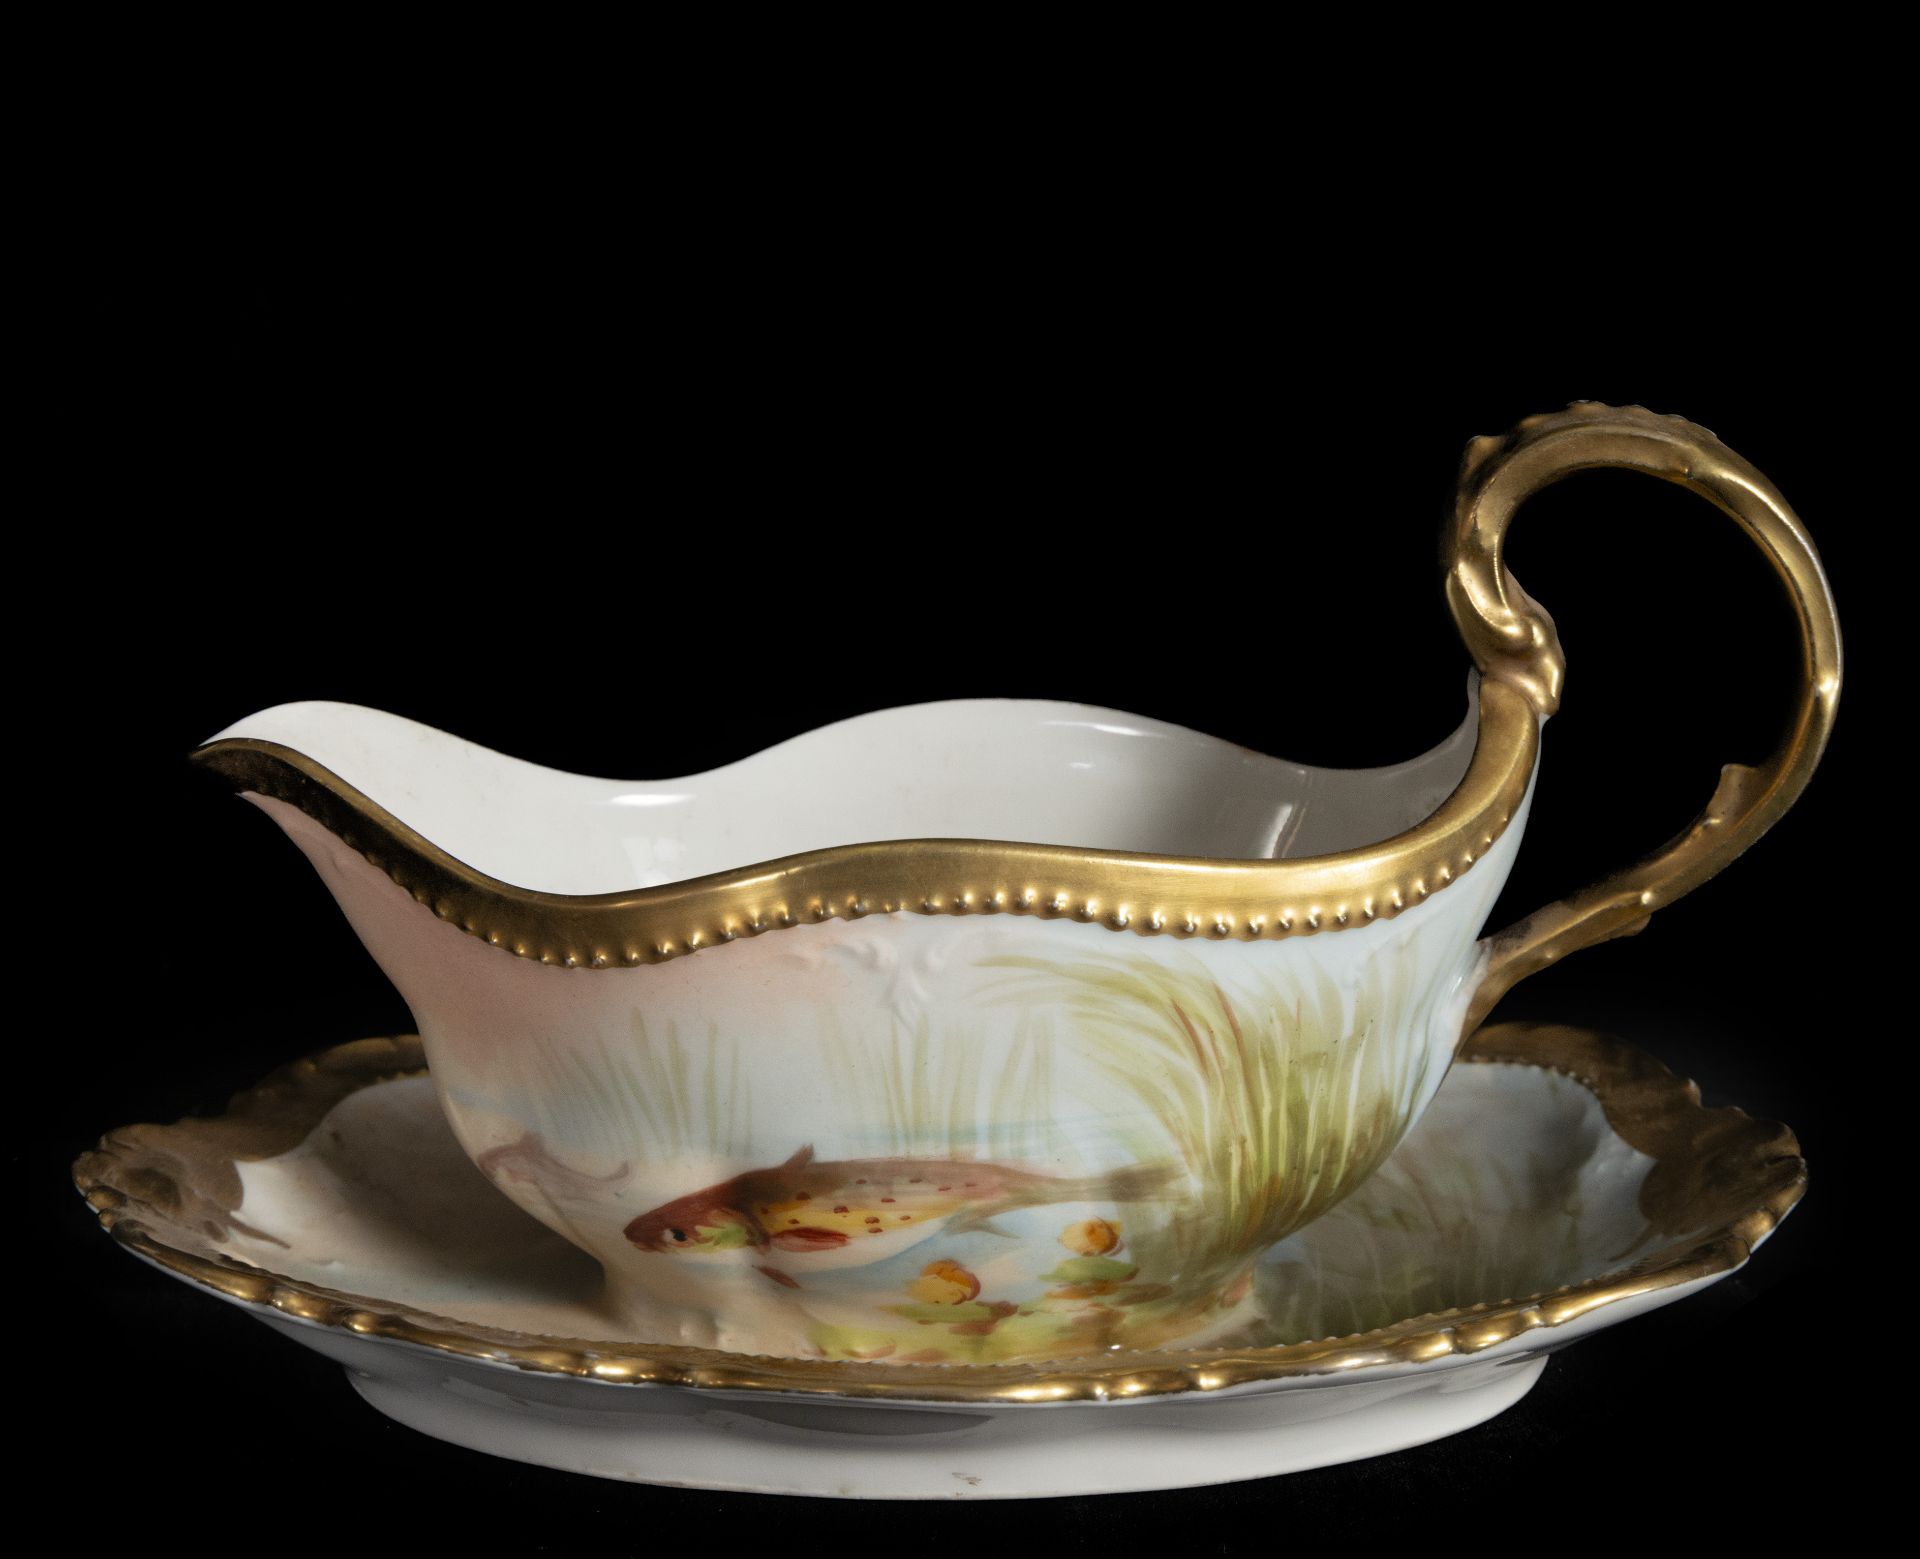 19th Century Limoges Porcelain Fish Dinnerware Set by the Count of Artois, 19th Century - Image 12 of 12